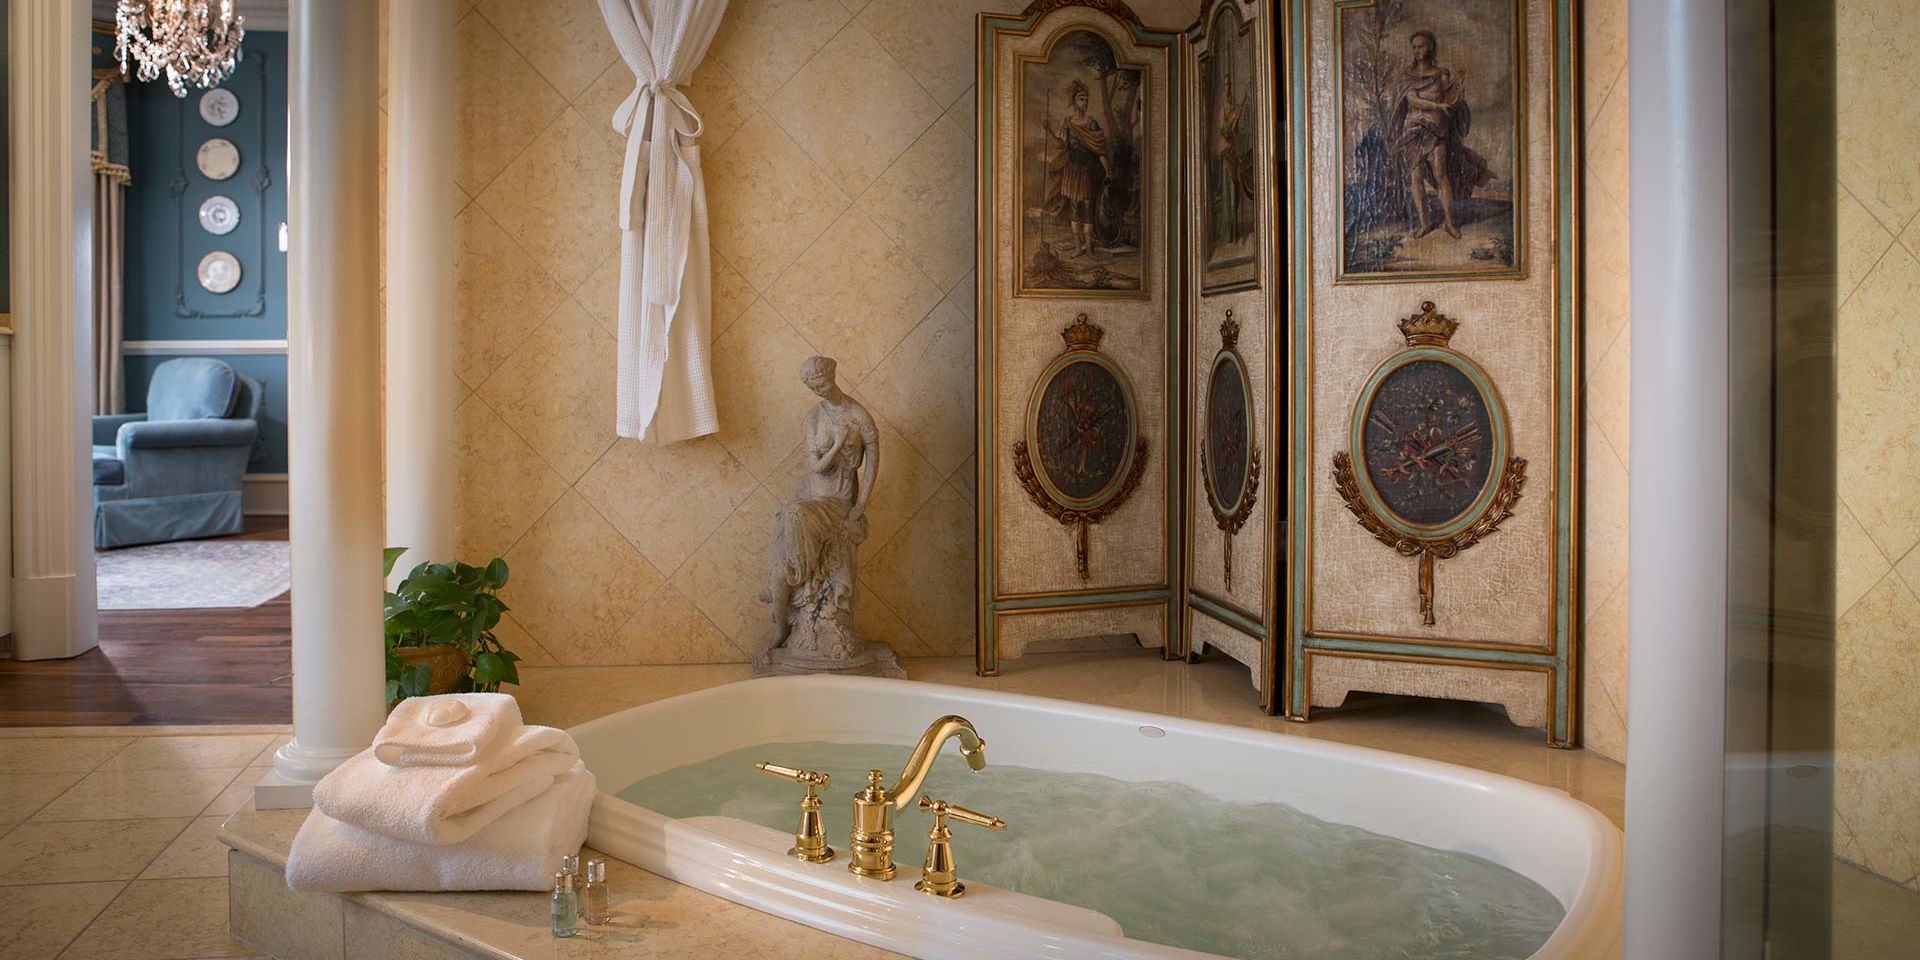 Separate jetted tub inside the Renaissance Guest Room bathroom